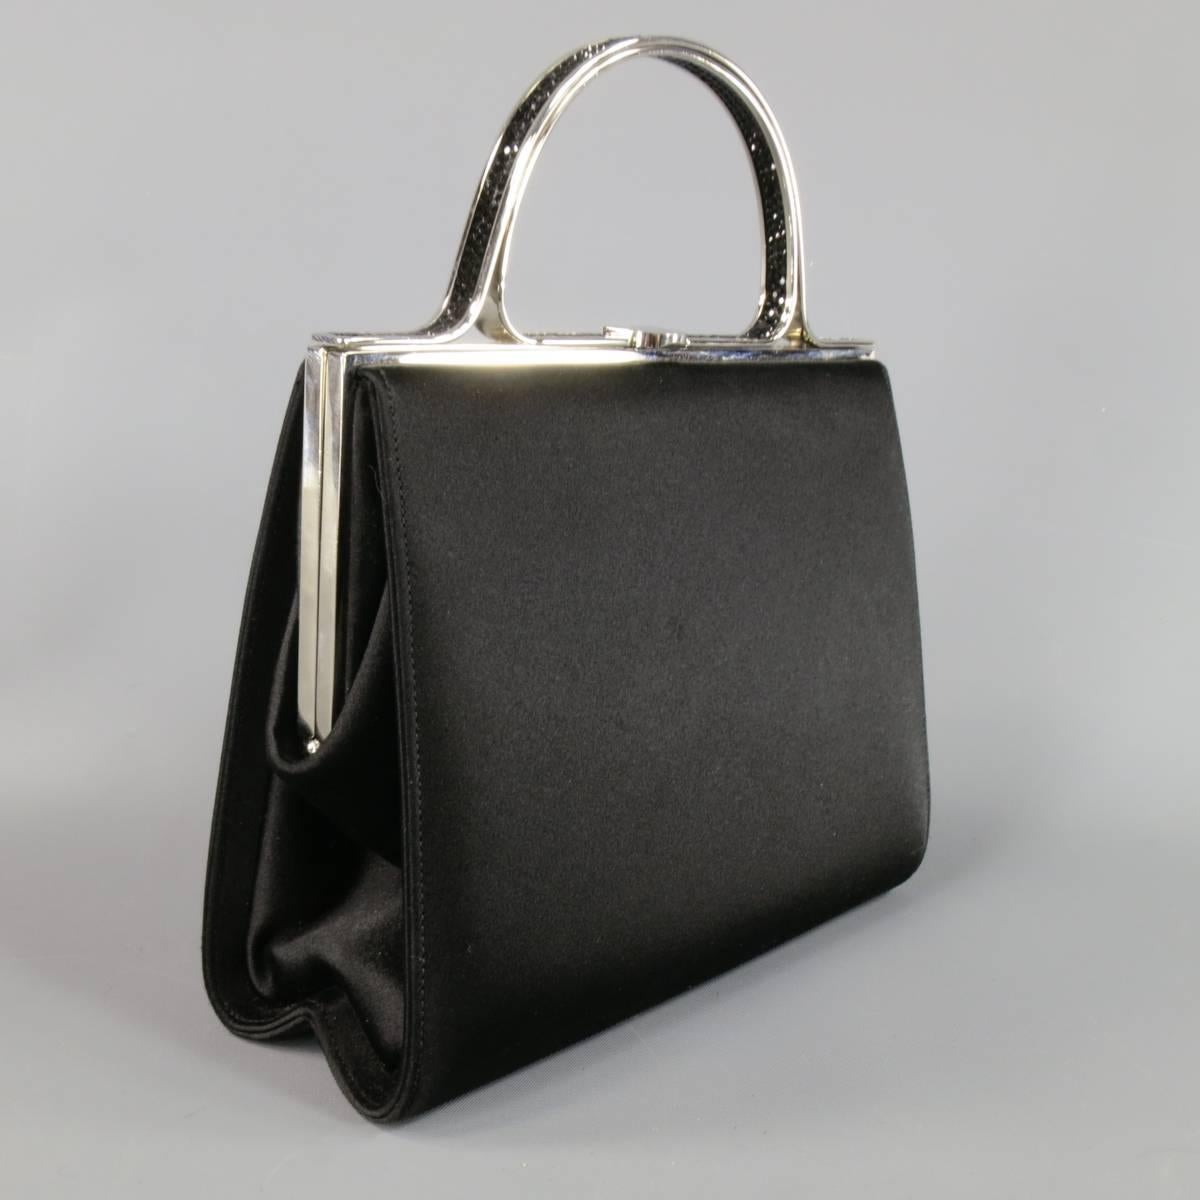 Vintage JUDITH LEIBER evening bag in black silk satin featuring a silver tone metal handle with black crystal embellishments. Includes dust bag, mirror, and comb with tassel. Missing one stone shown in detail shot. Made in Italy.
Retails at